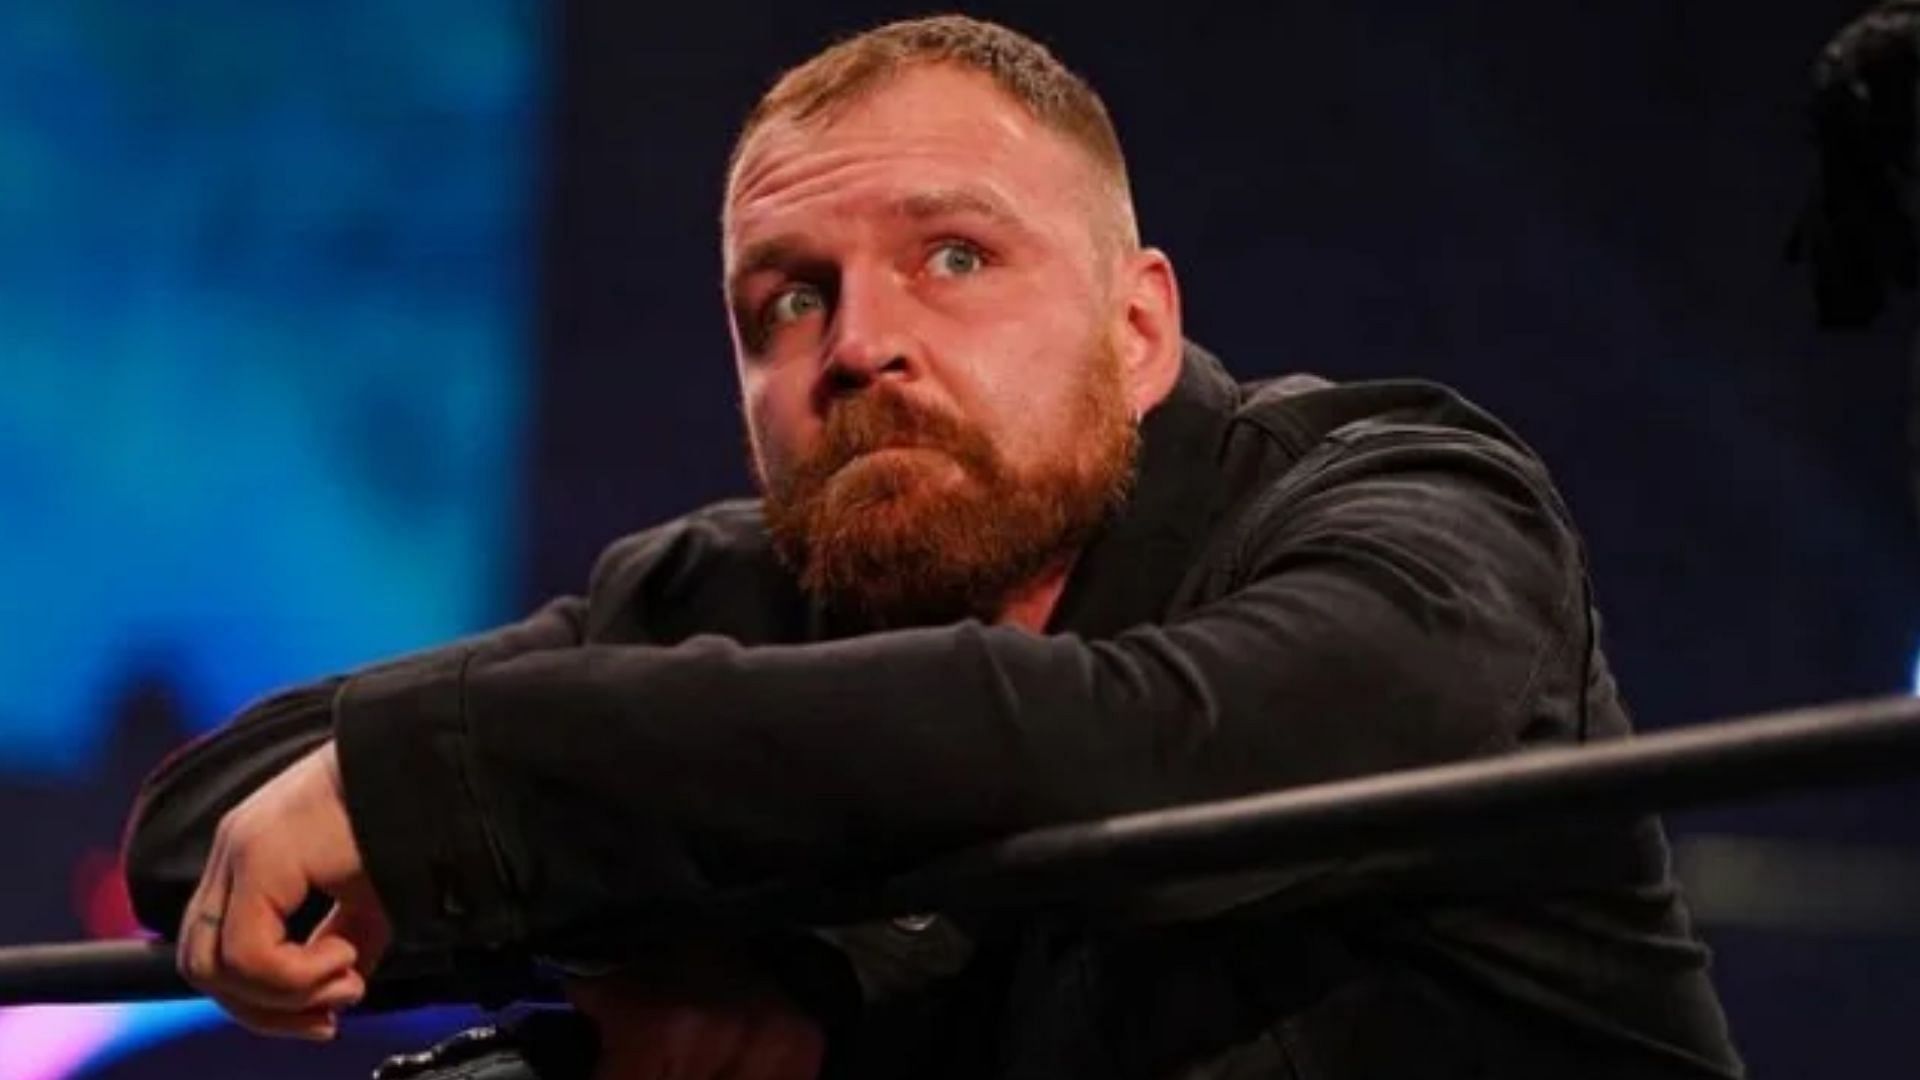 Jon Moxley recently suffered a concussion during a match